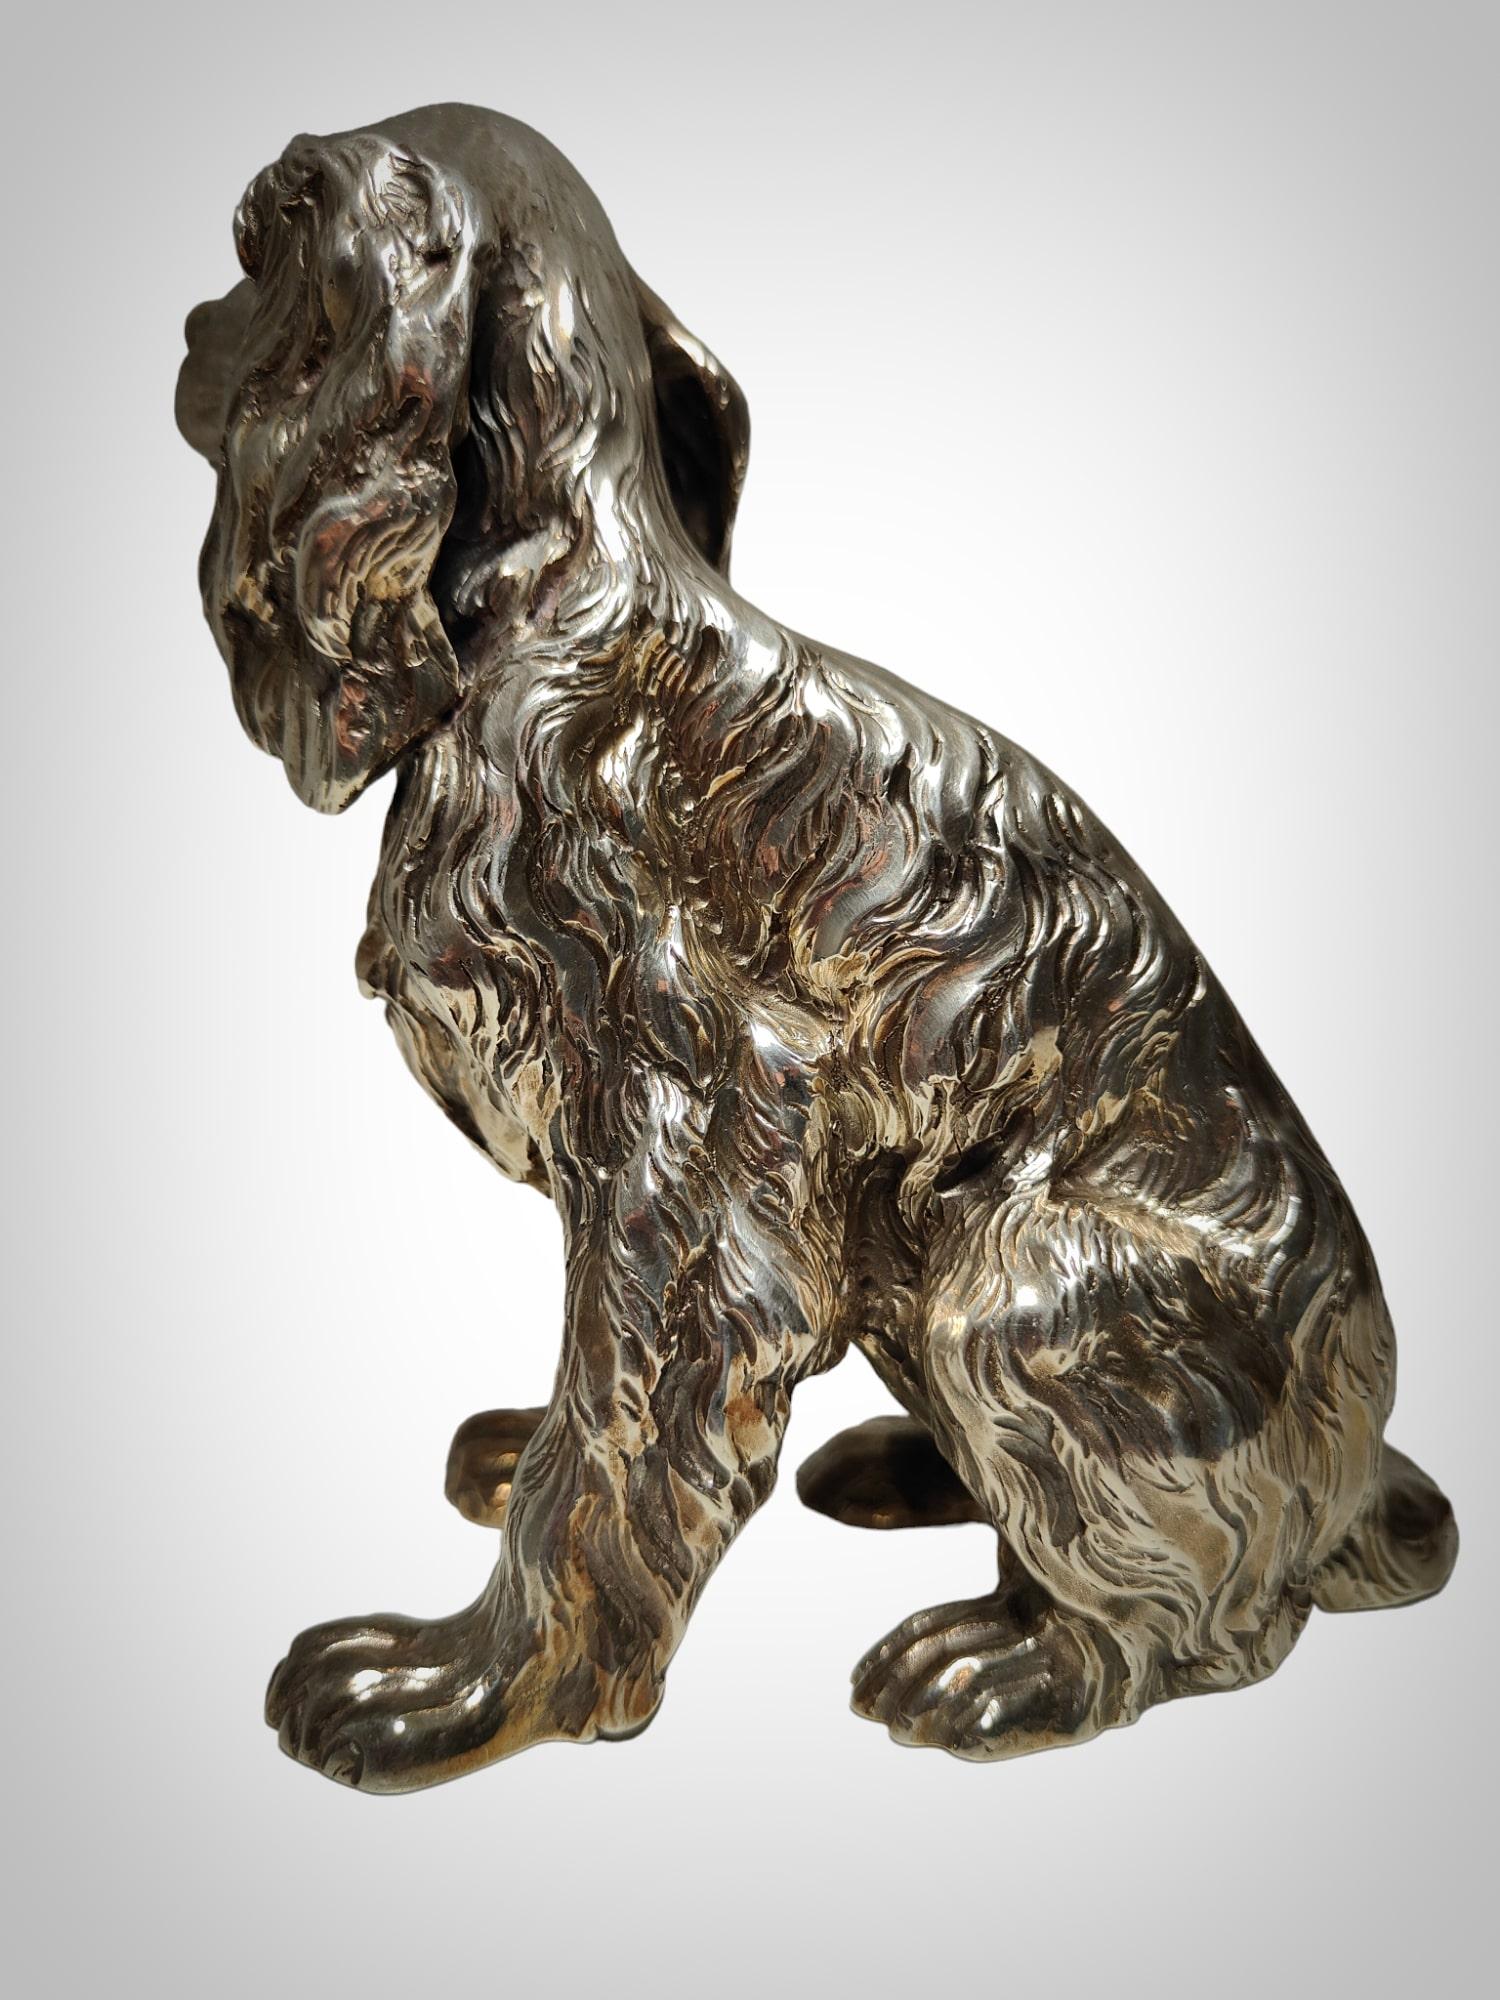 Exquisite Pair of Italian Solid Silver Cocker Spaniel Dogs For Sale 1